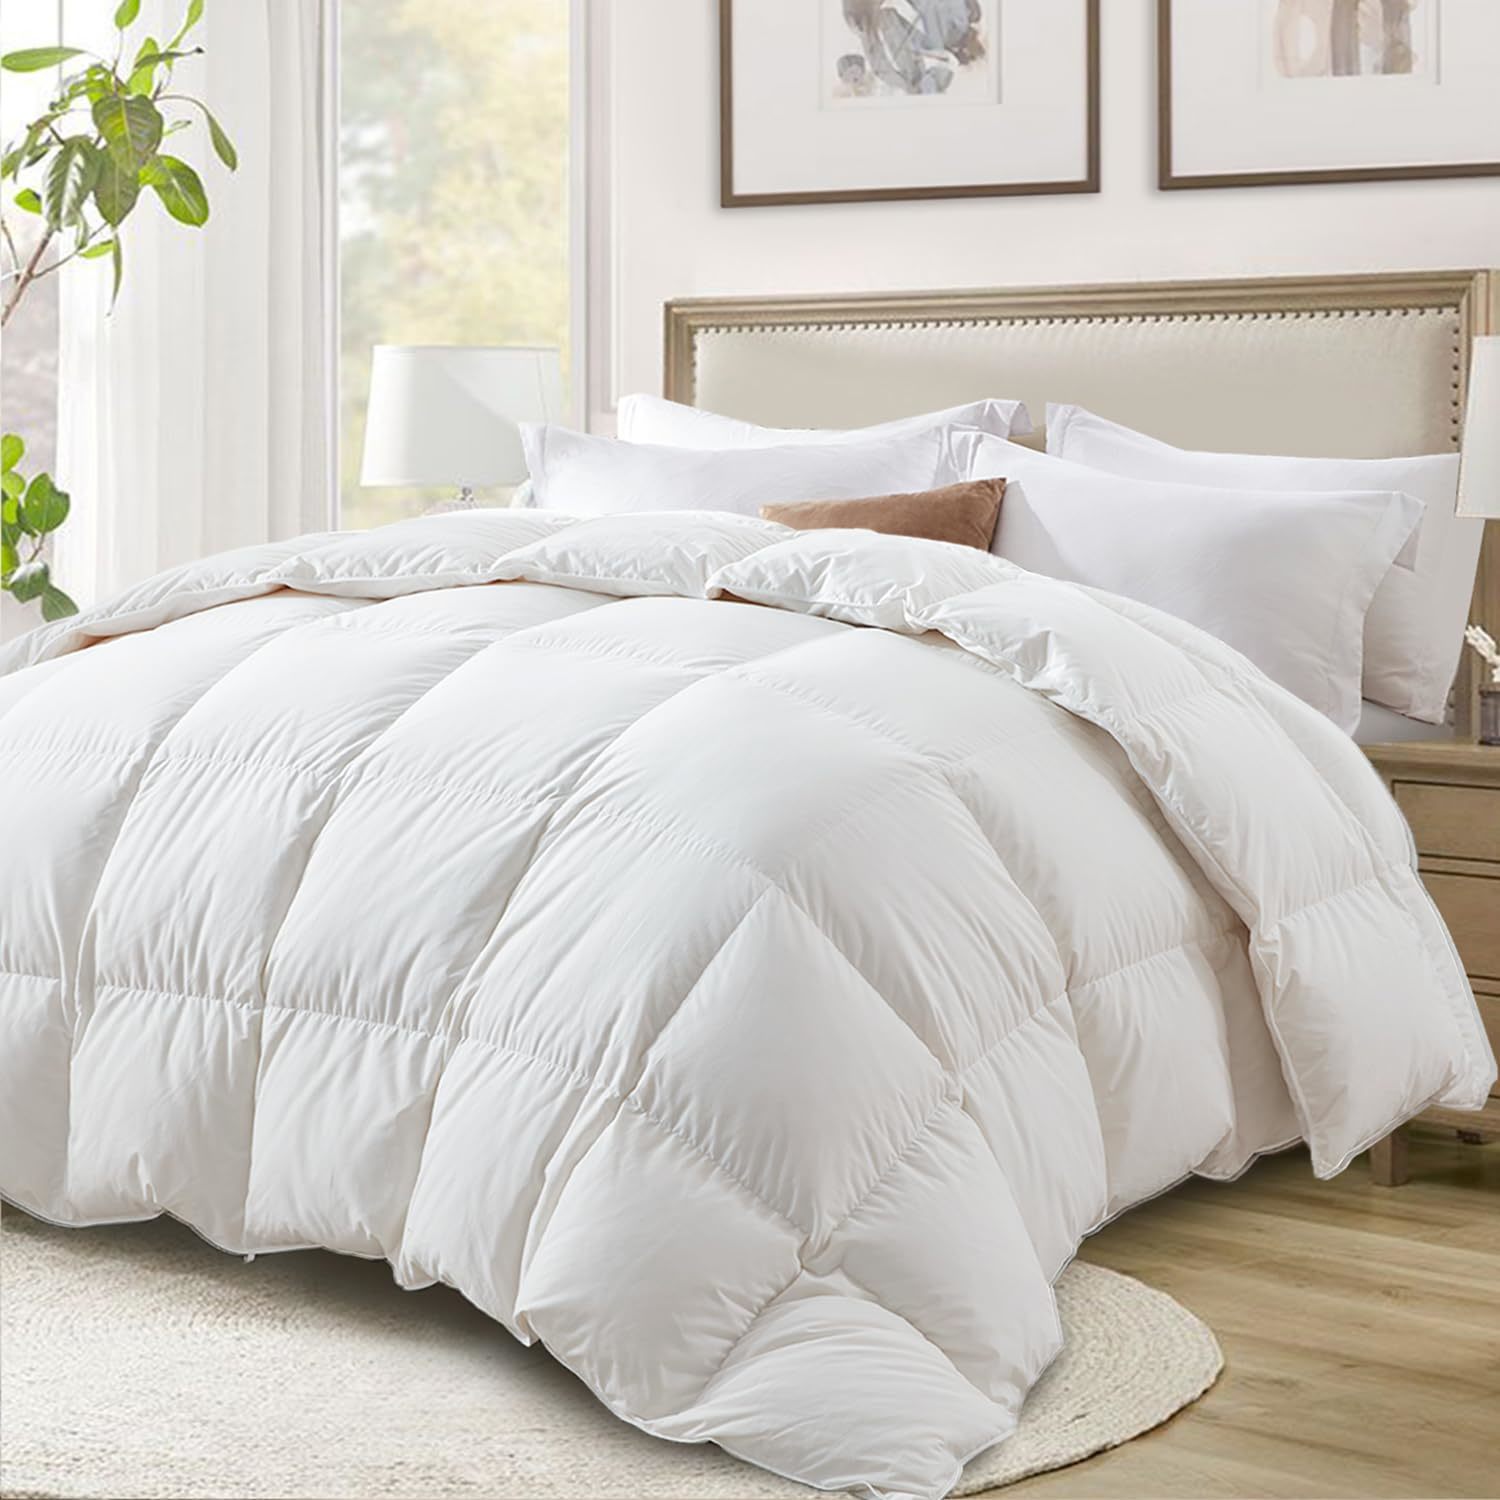 Ultra-Soft Down Feather Comforter King Size,Luxurious Hotel Collection Fluffy Du - $254.59